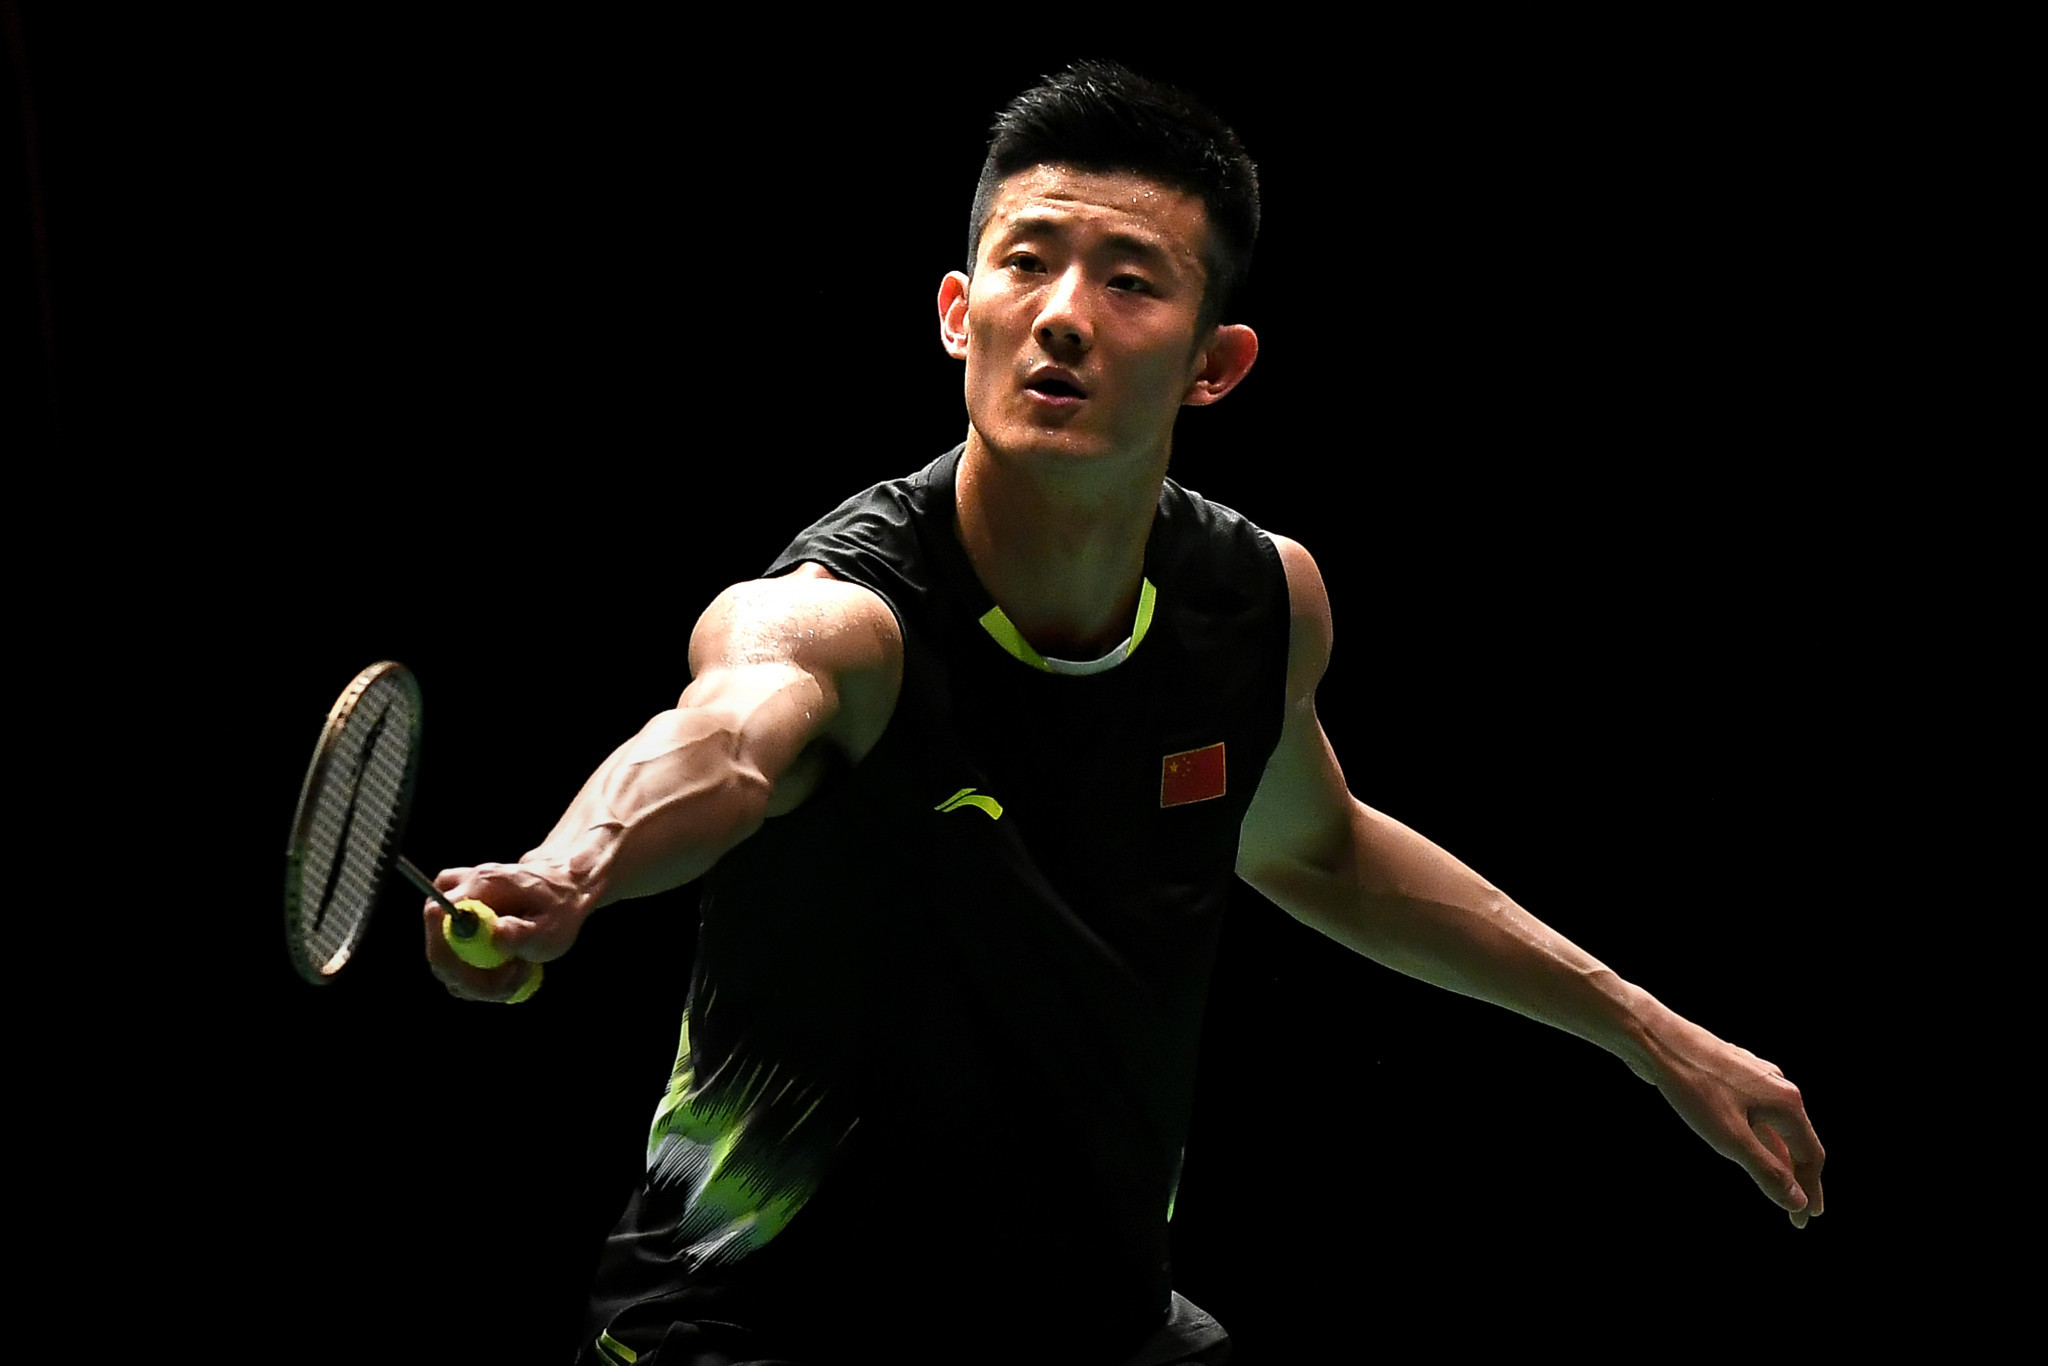 Olympic champion Chen knocked out as All England Open Badminton Championships begin